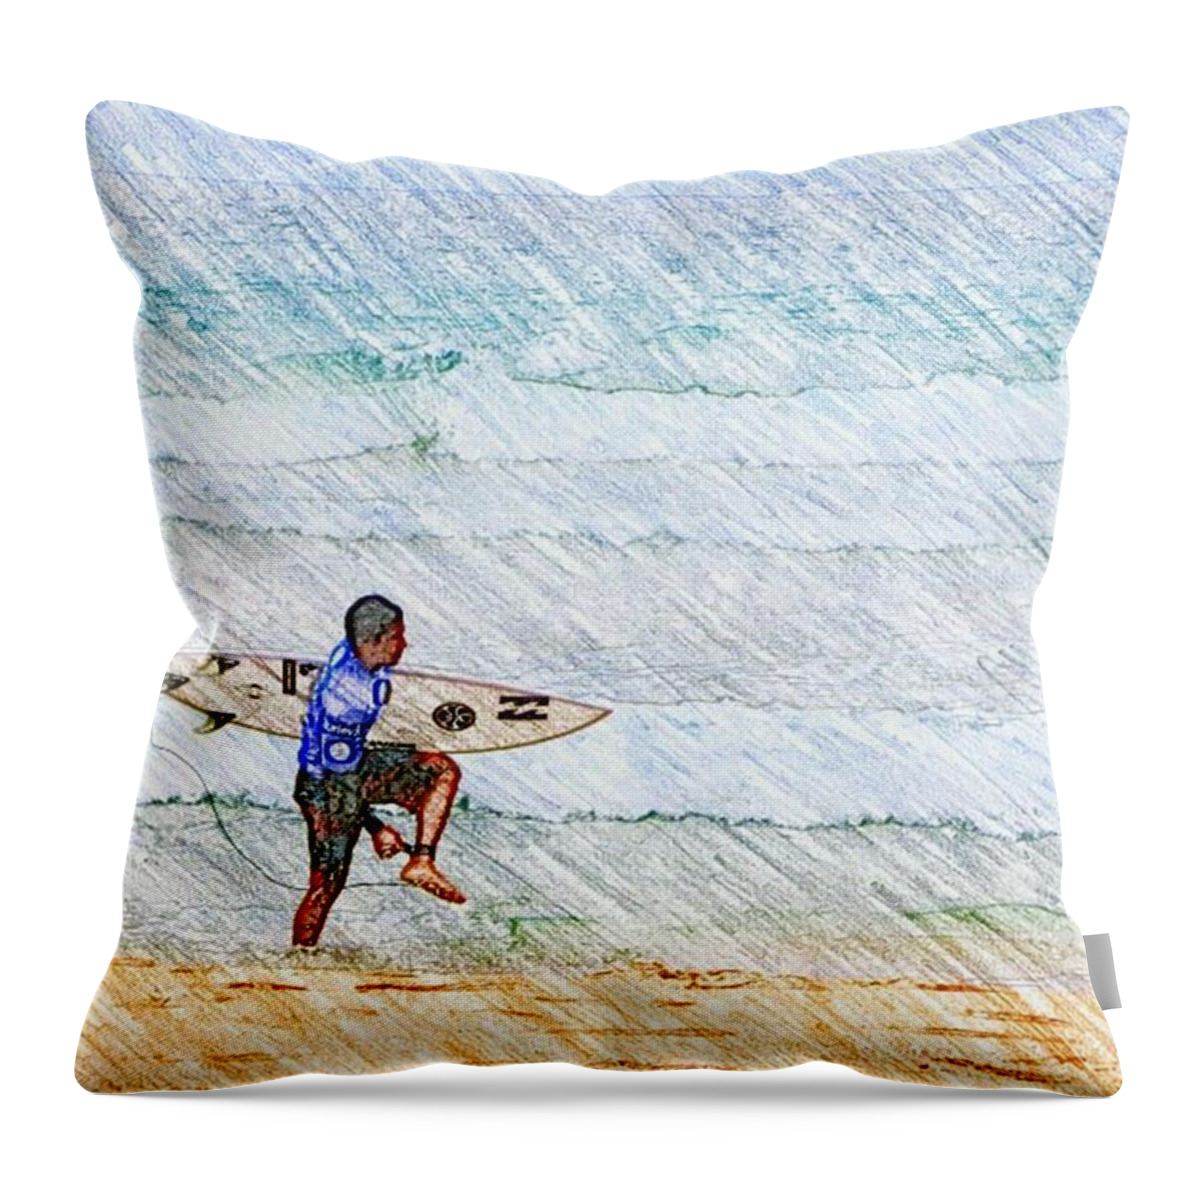 Skyblue Throw Pillow featuring the photograph Surfer In Aus by Daisuke Kondo